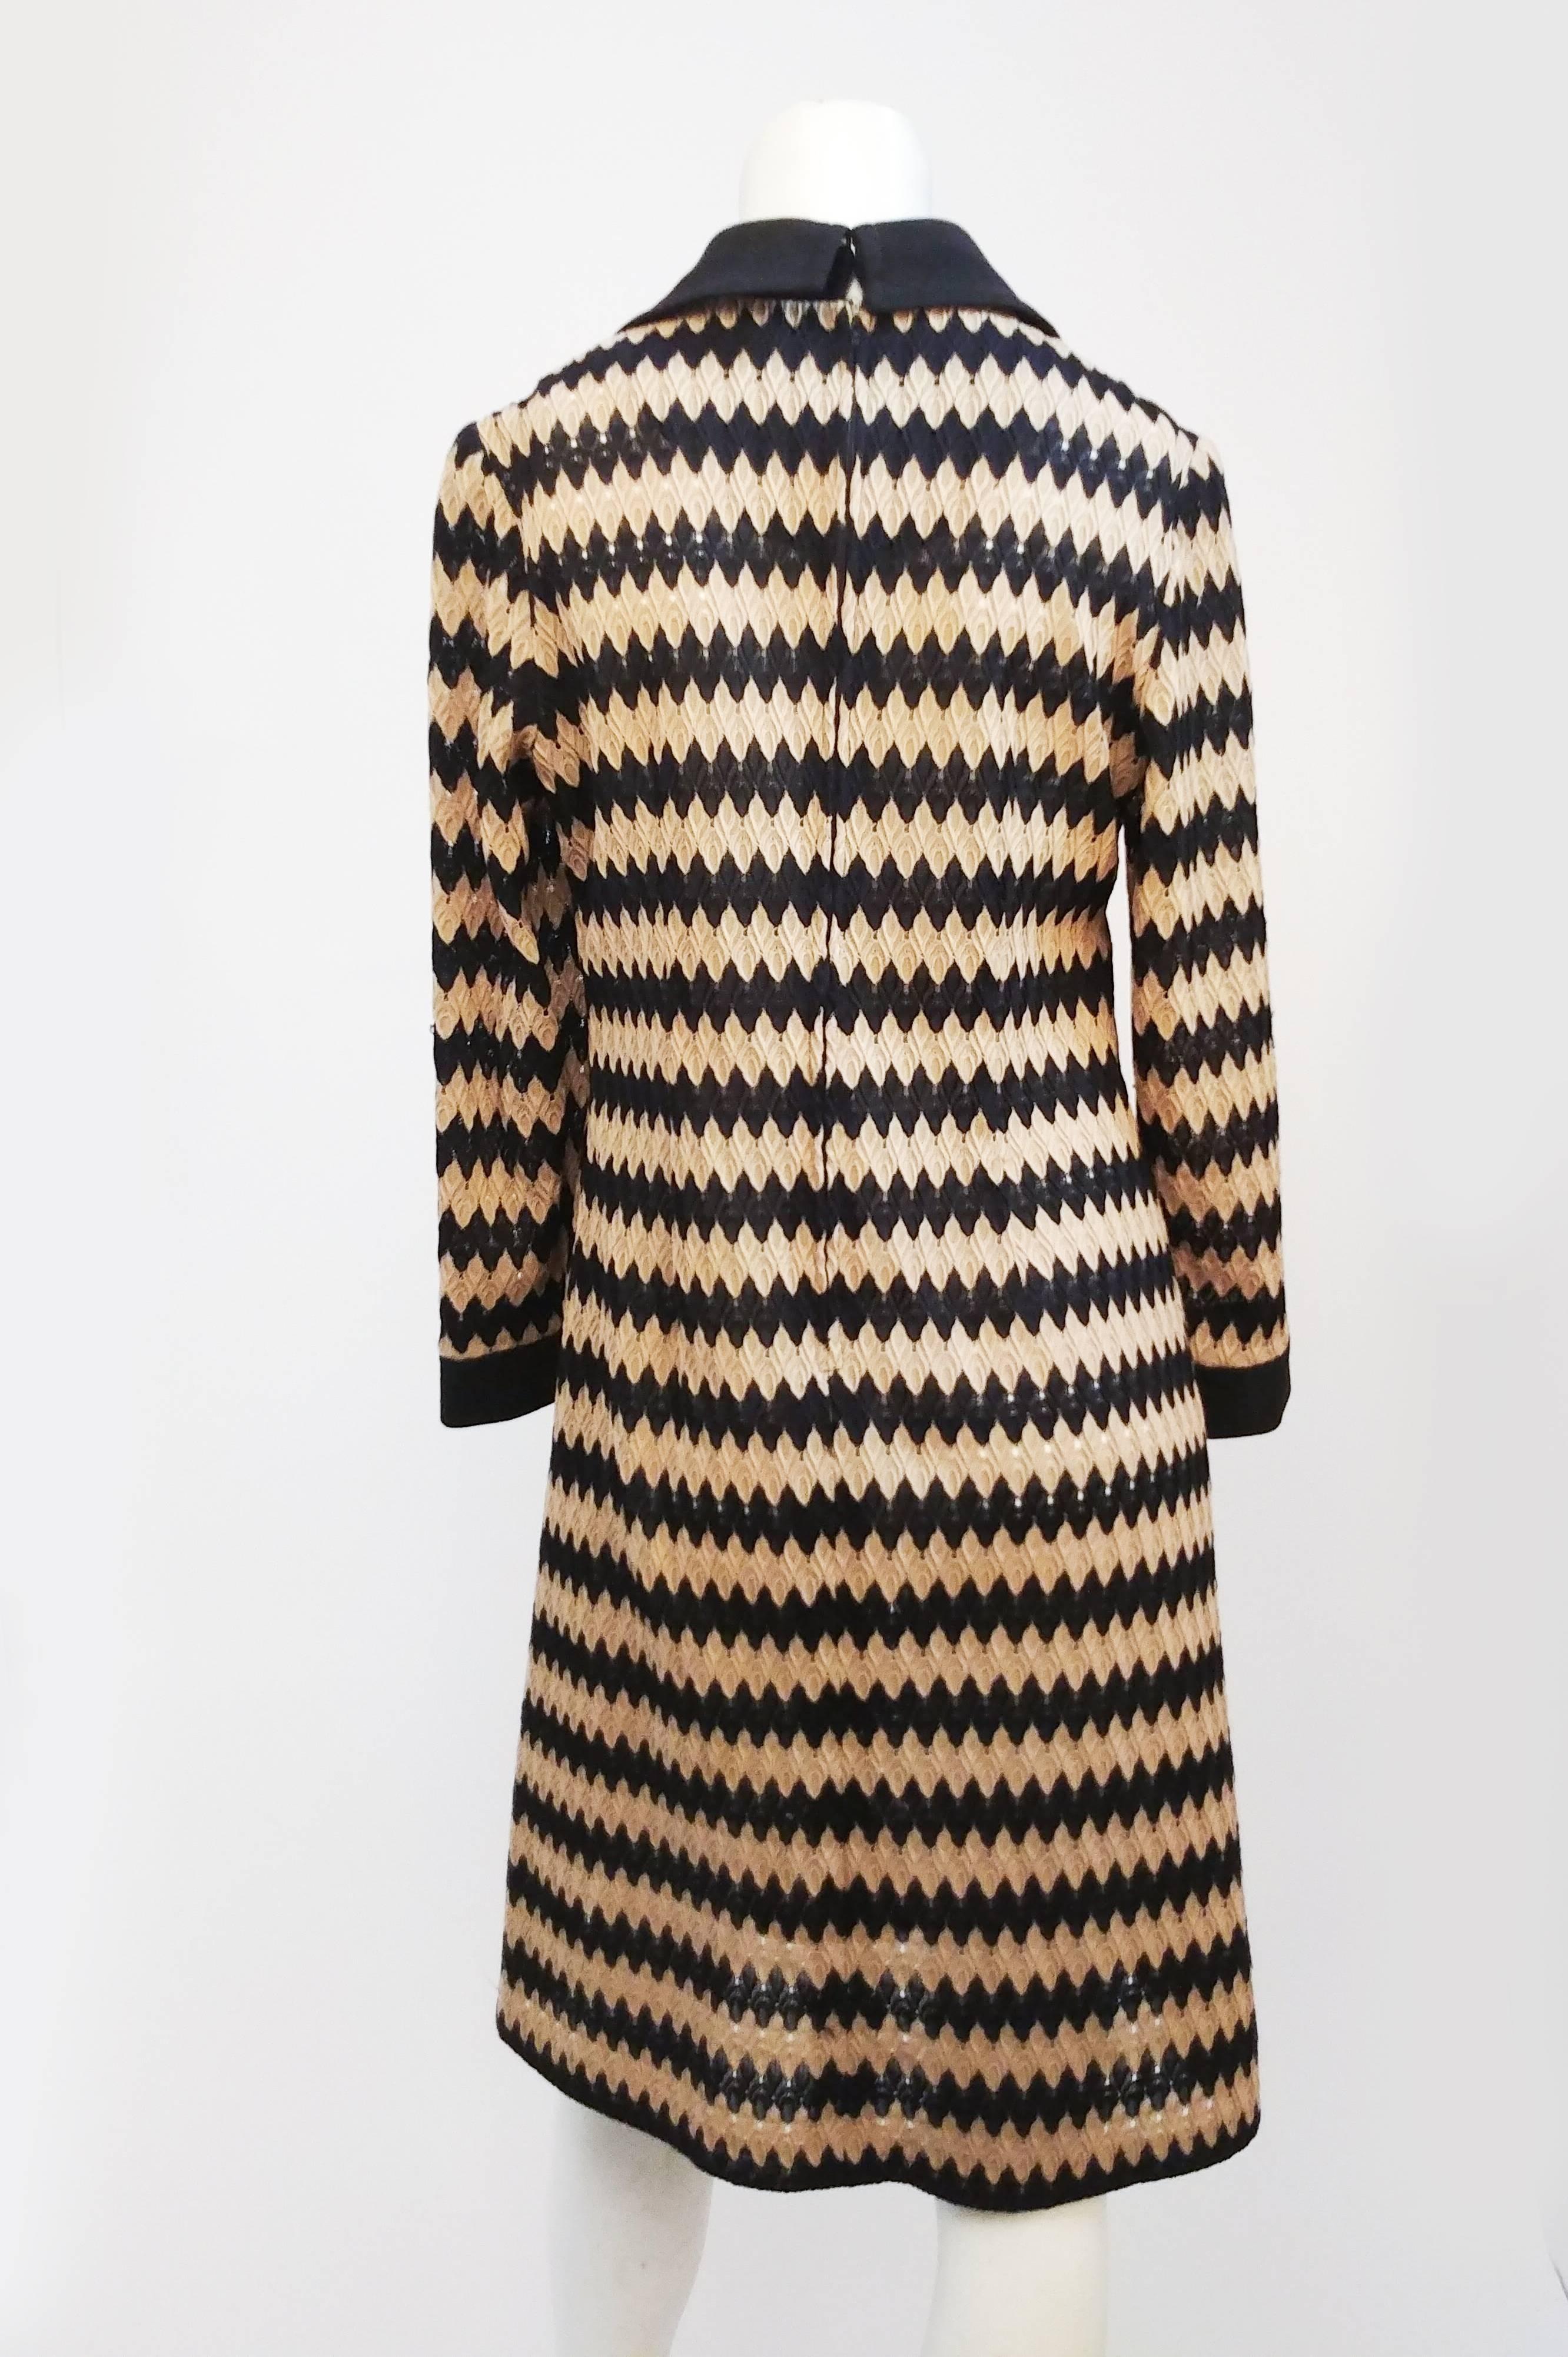 Tan and Black Knit Zig-Zag Collared Dress, 1970s. Long sleeve knit dress with contrast zigzag pattern, large 1970s collar, and matching cuffs at wrists.